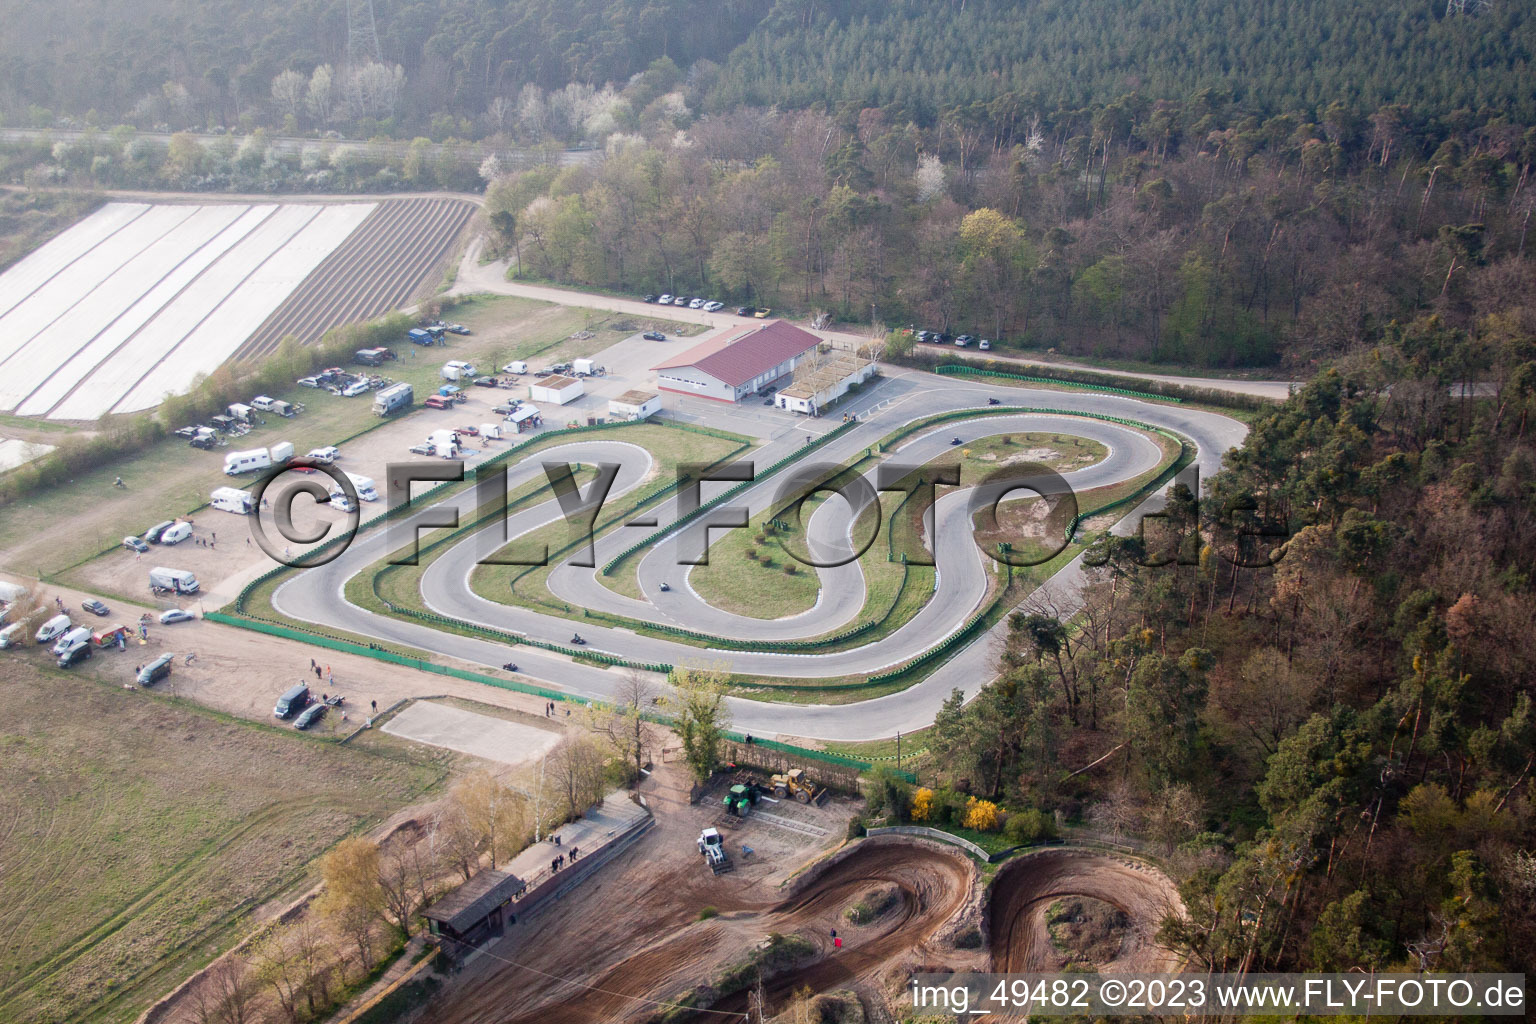 Aerial view of Go-kart track in Walldorf in the state Baden-Wuerttemberg, Germany